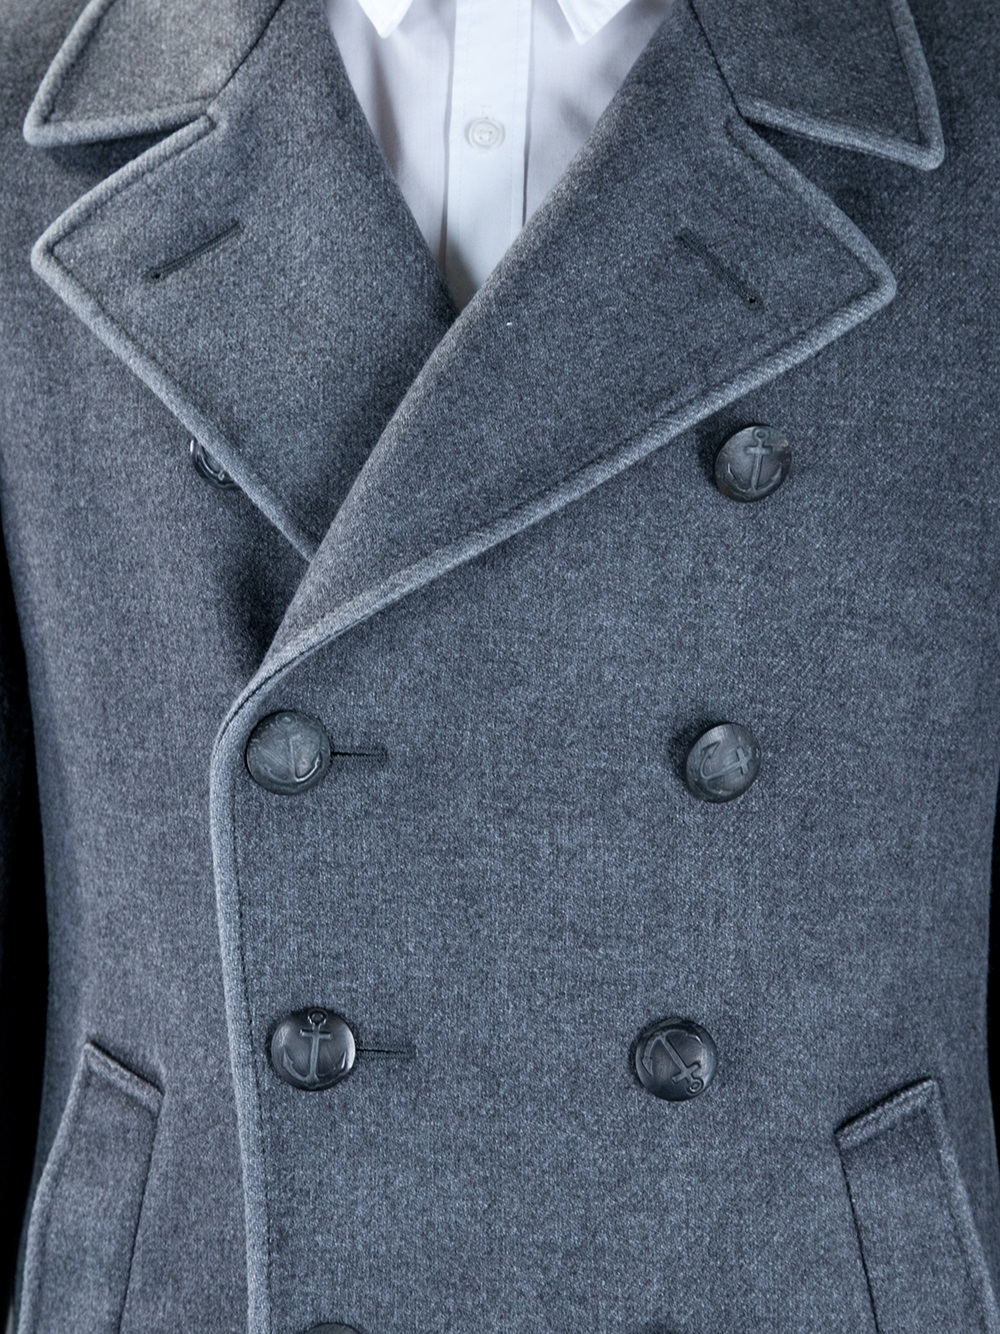 Nautical buttons on Gray wool | SOLETOPIA